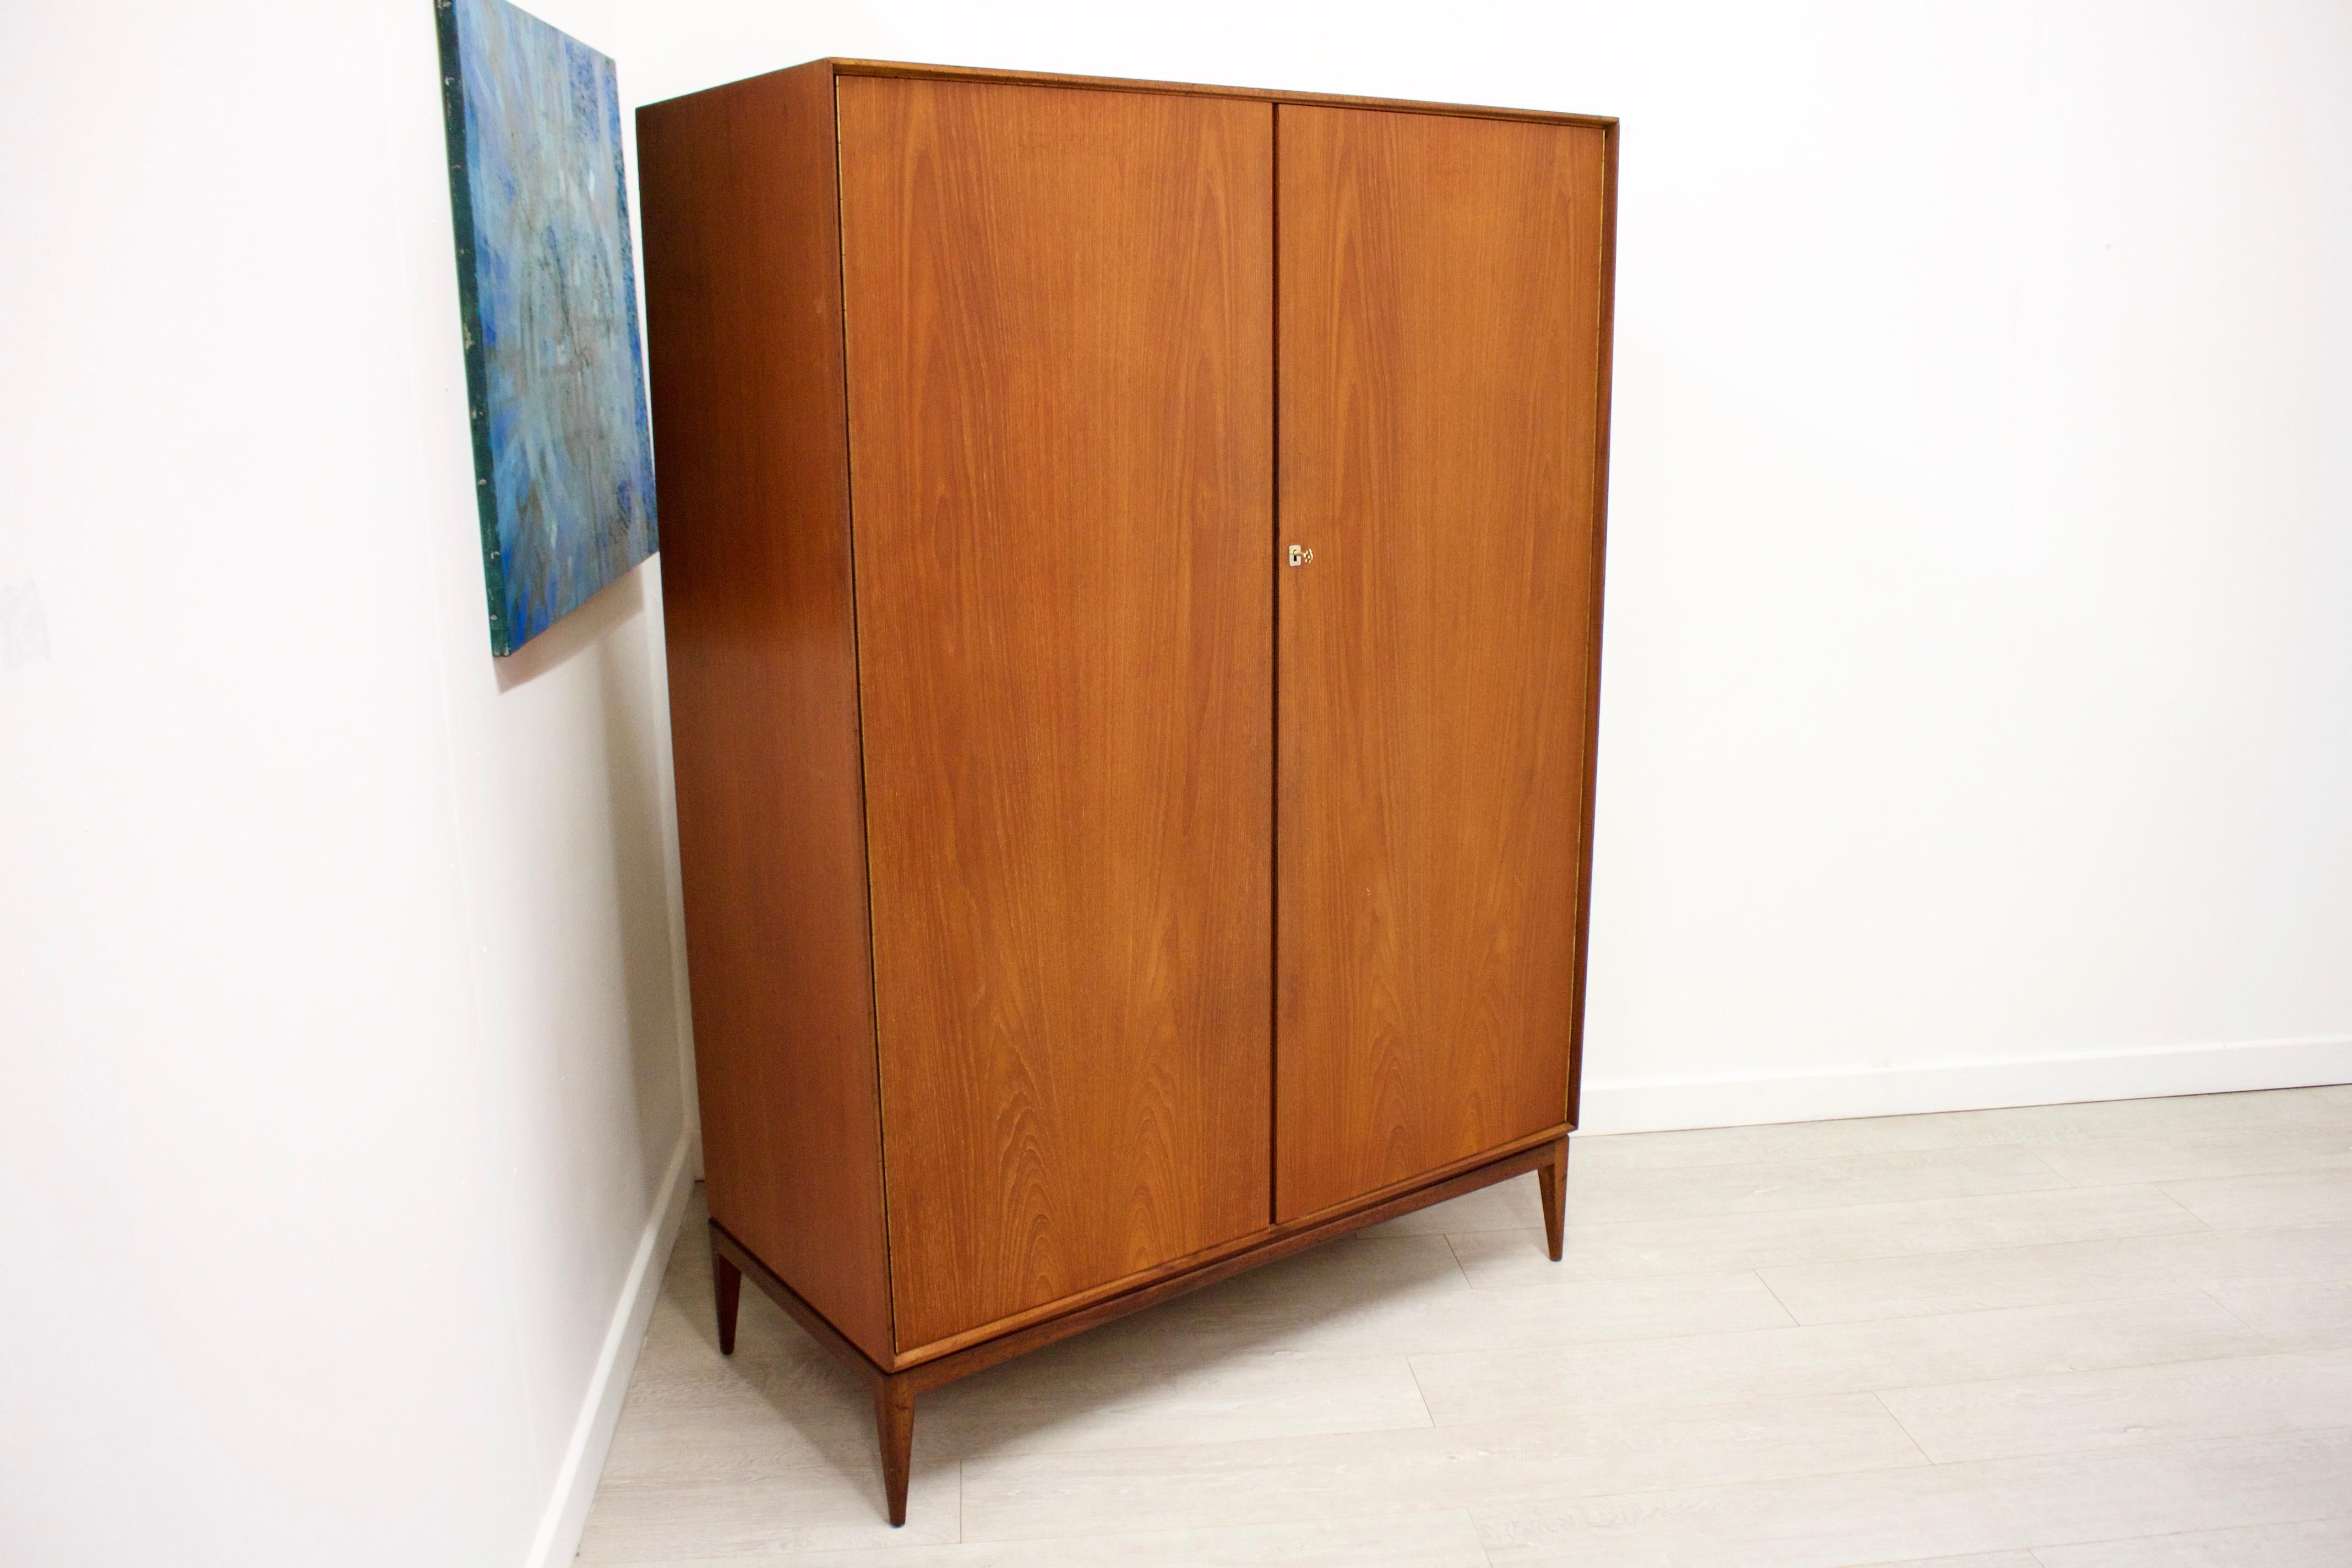 - Mid-Century Modern wardrobe
- Manufactured by McIntosh
- Made from teak and teak veneer
- Featuring 2 hanging rails, a shelf in the top right, and a mirror on the inside of
the right door.